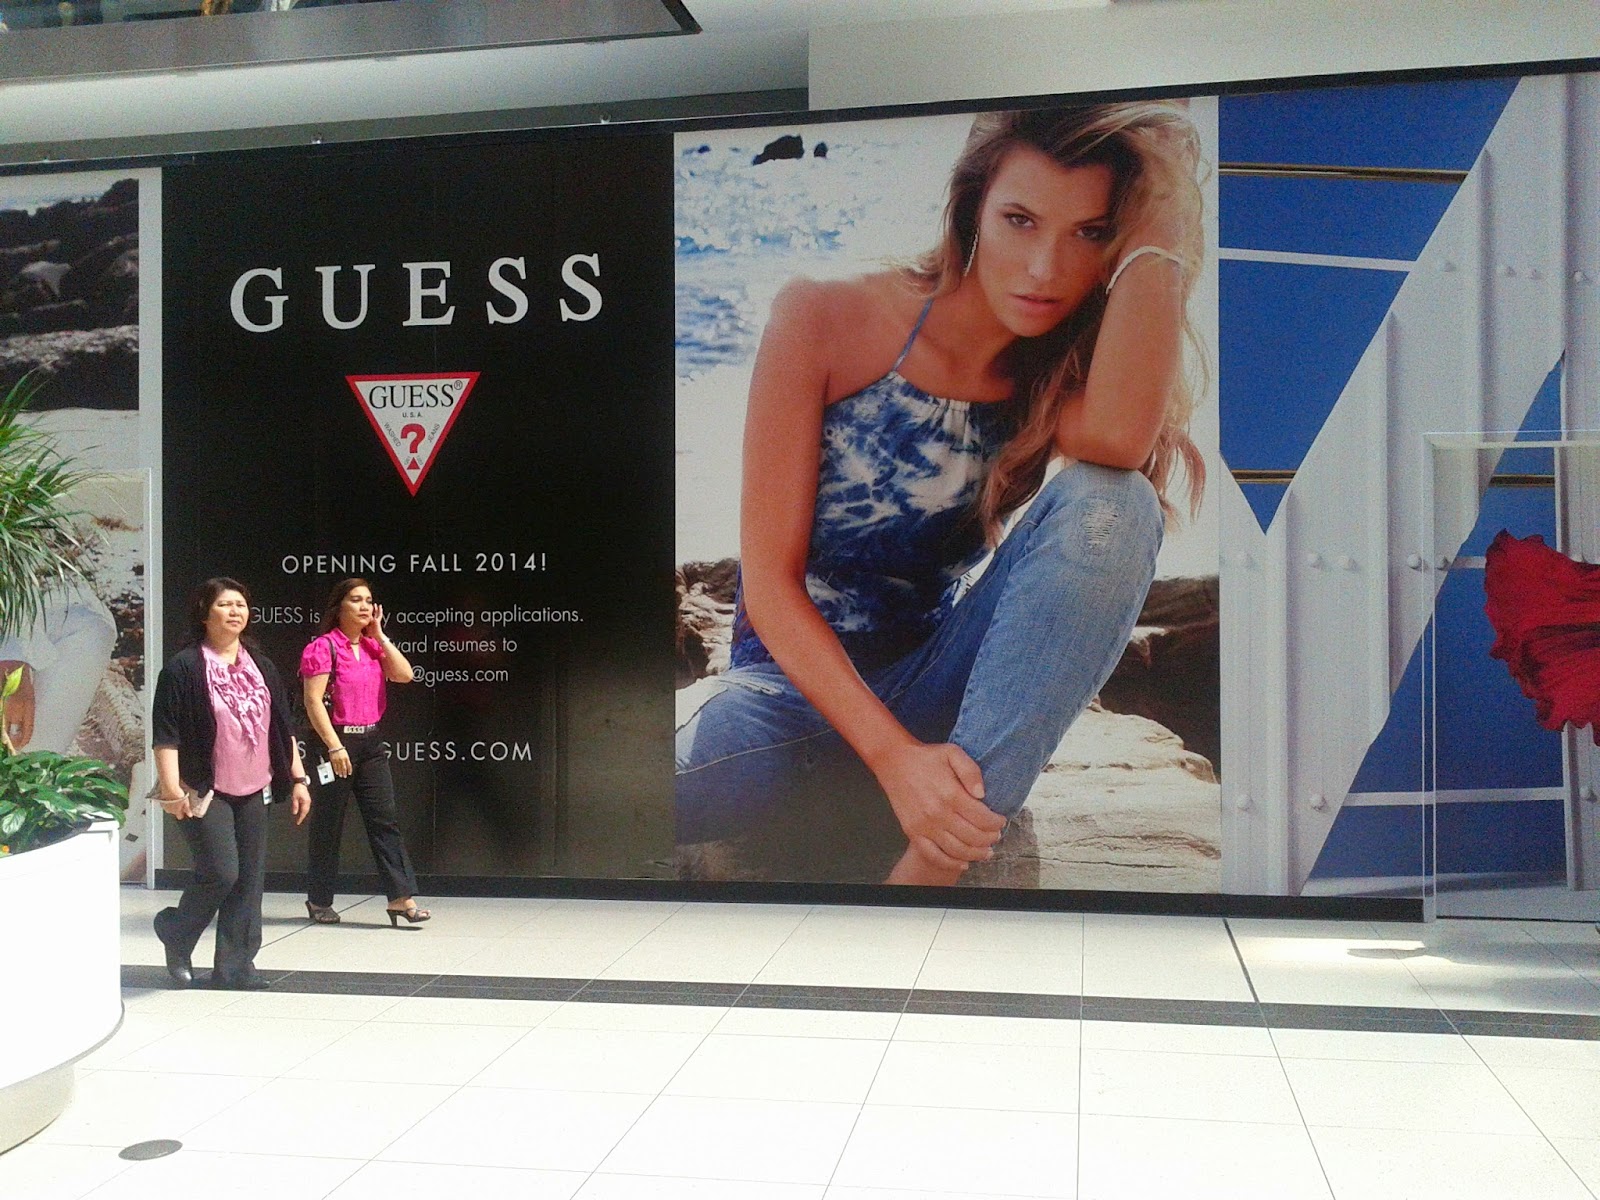 Toronto things: Guess opening in Eaton Centre, hiring too